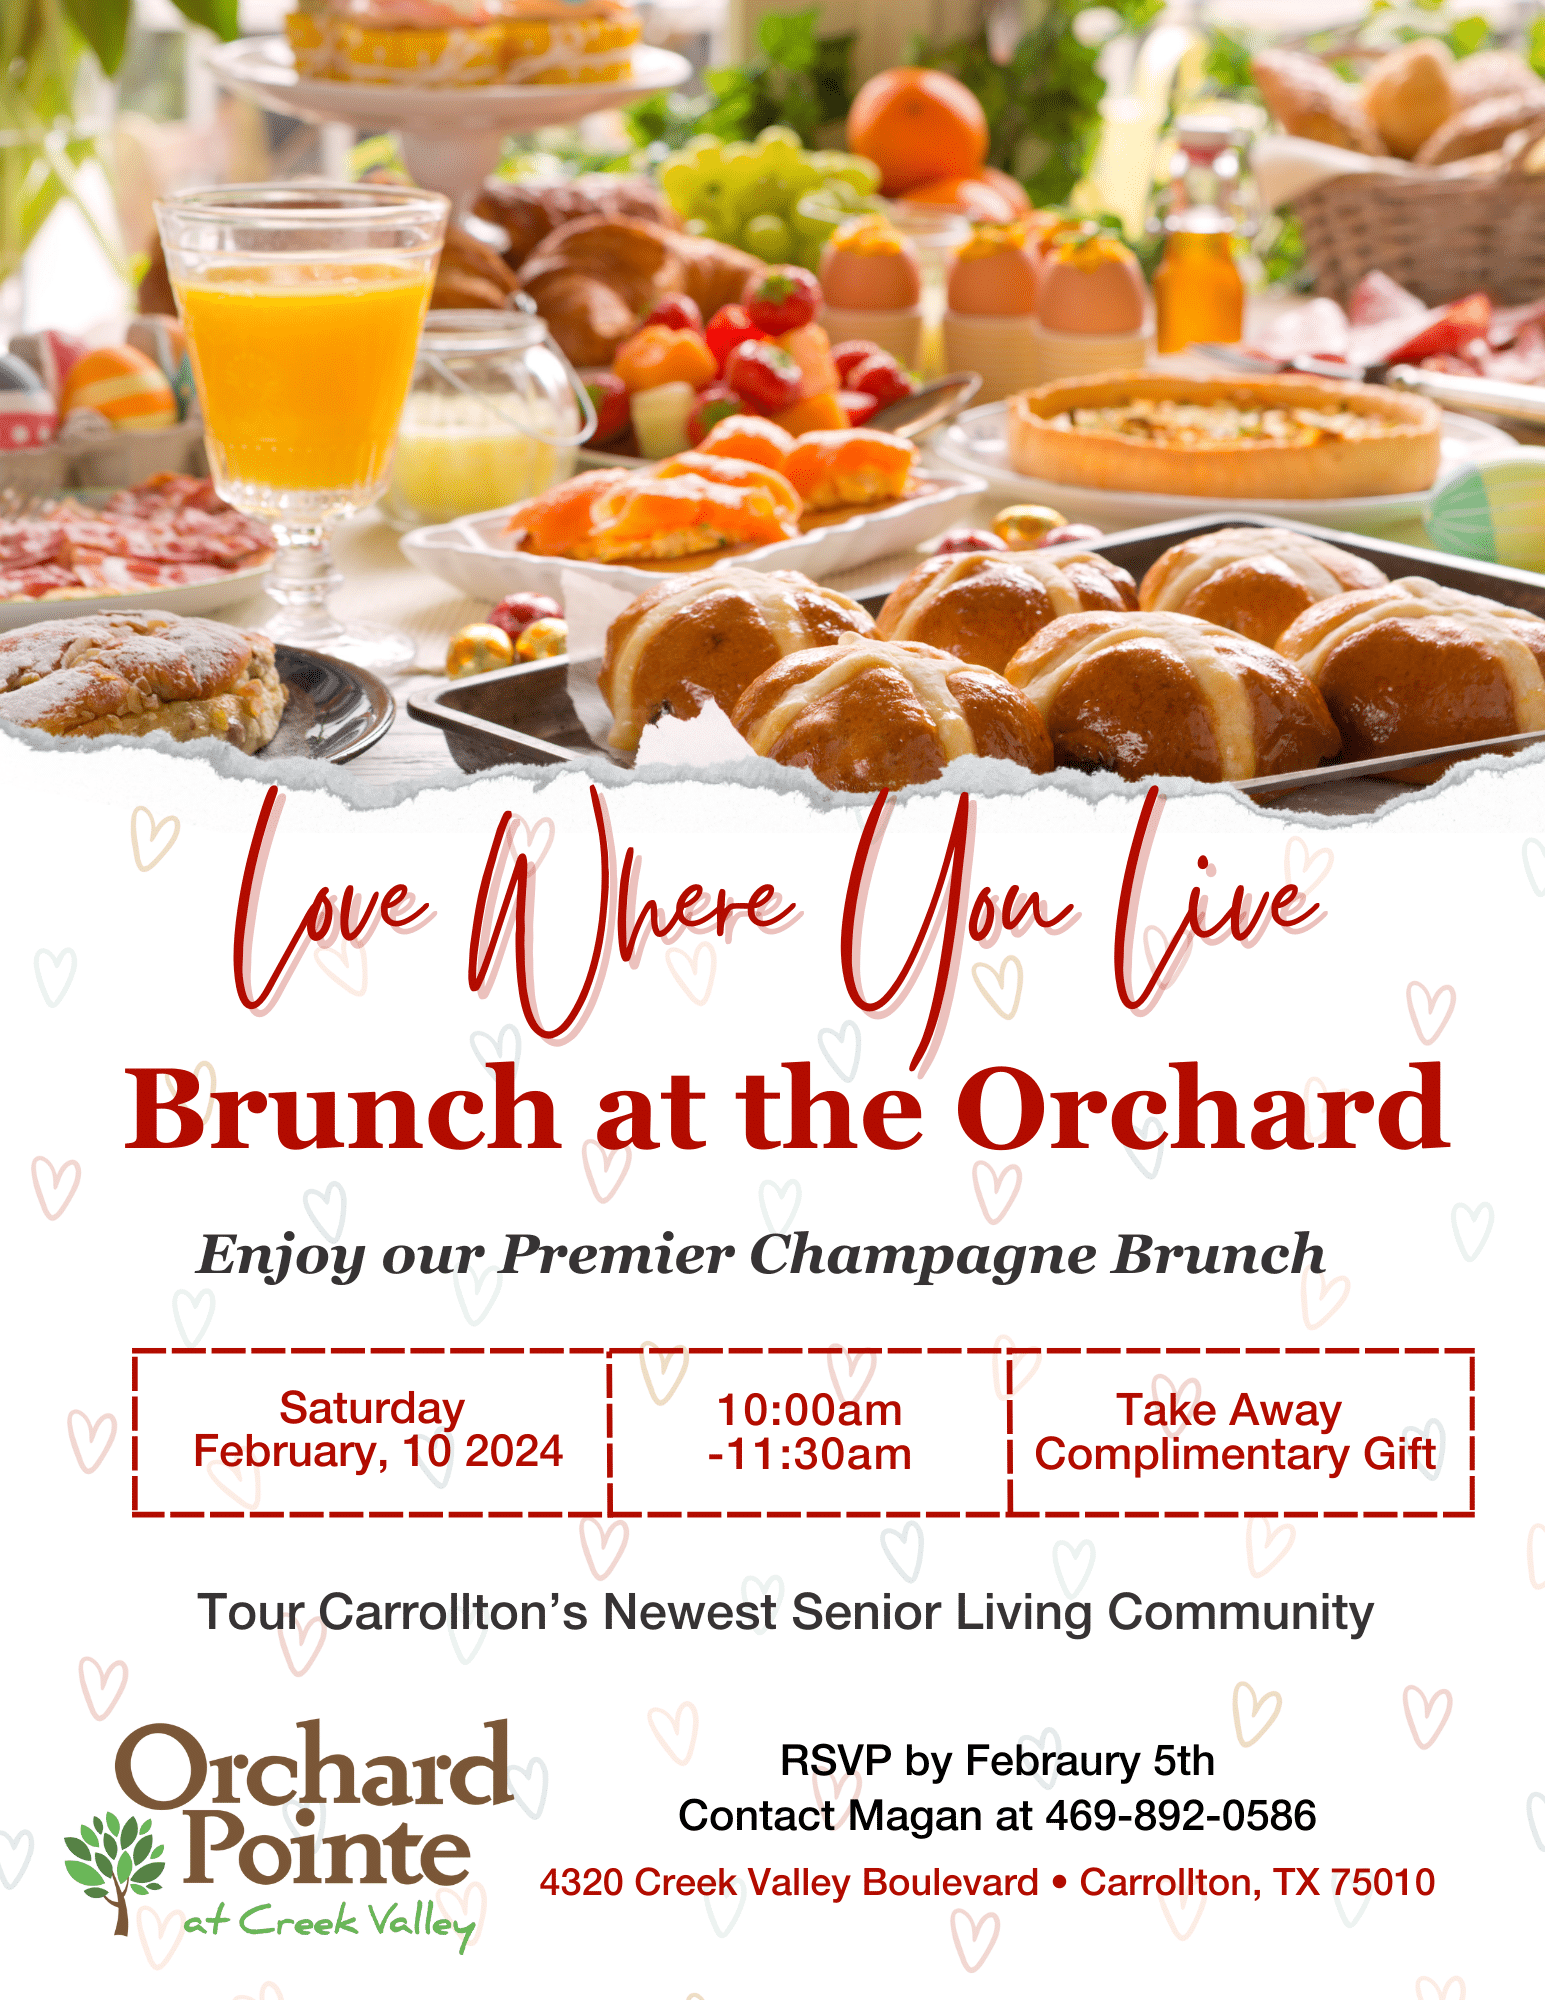 Invitation to enjoy brunch at the Orchard Pointe at Creek Valley